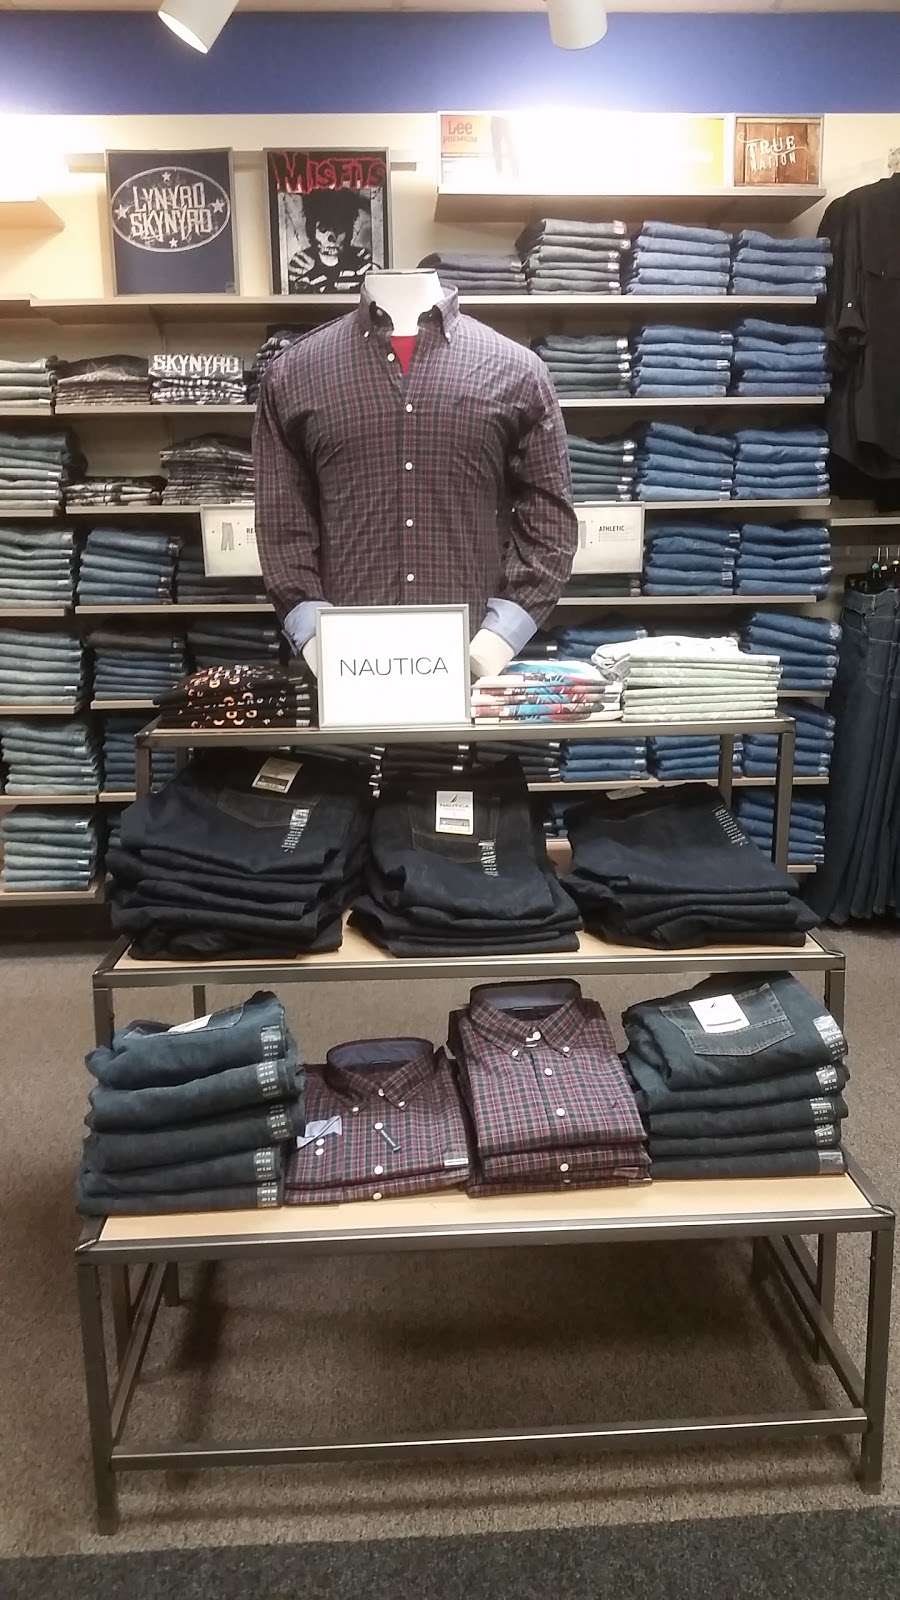 Casual Male XL Outlet | 13289 Worth Ave, Woodbridge, VA 22192 | Phone: (703) 494-5996